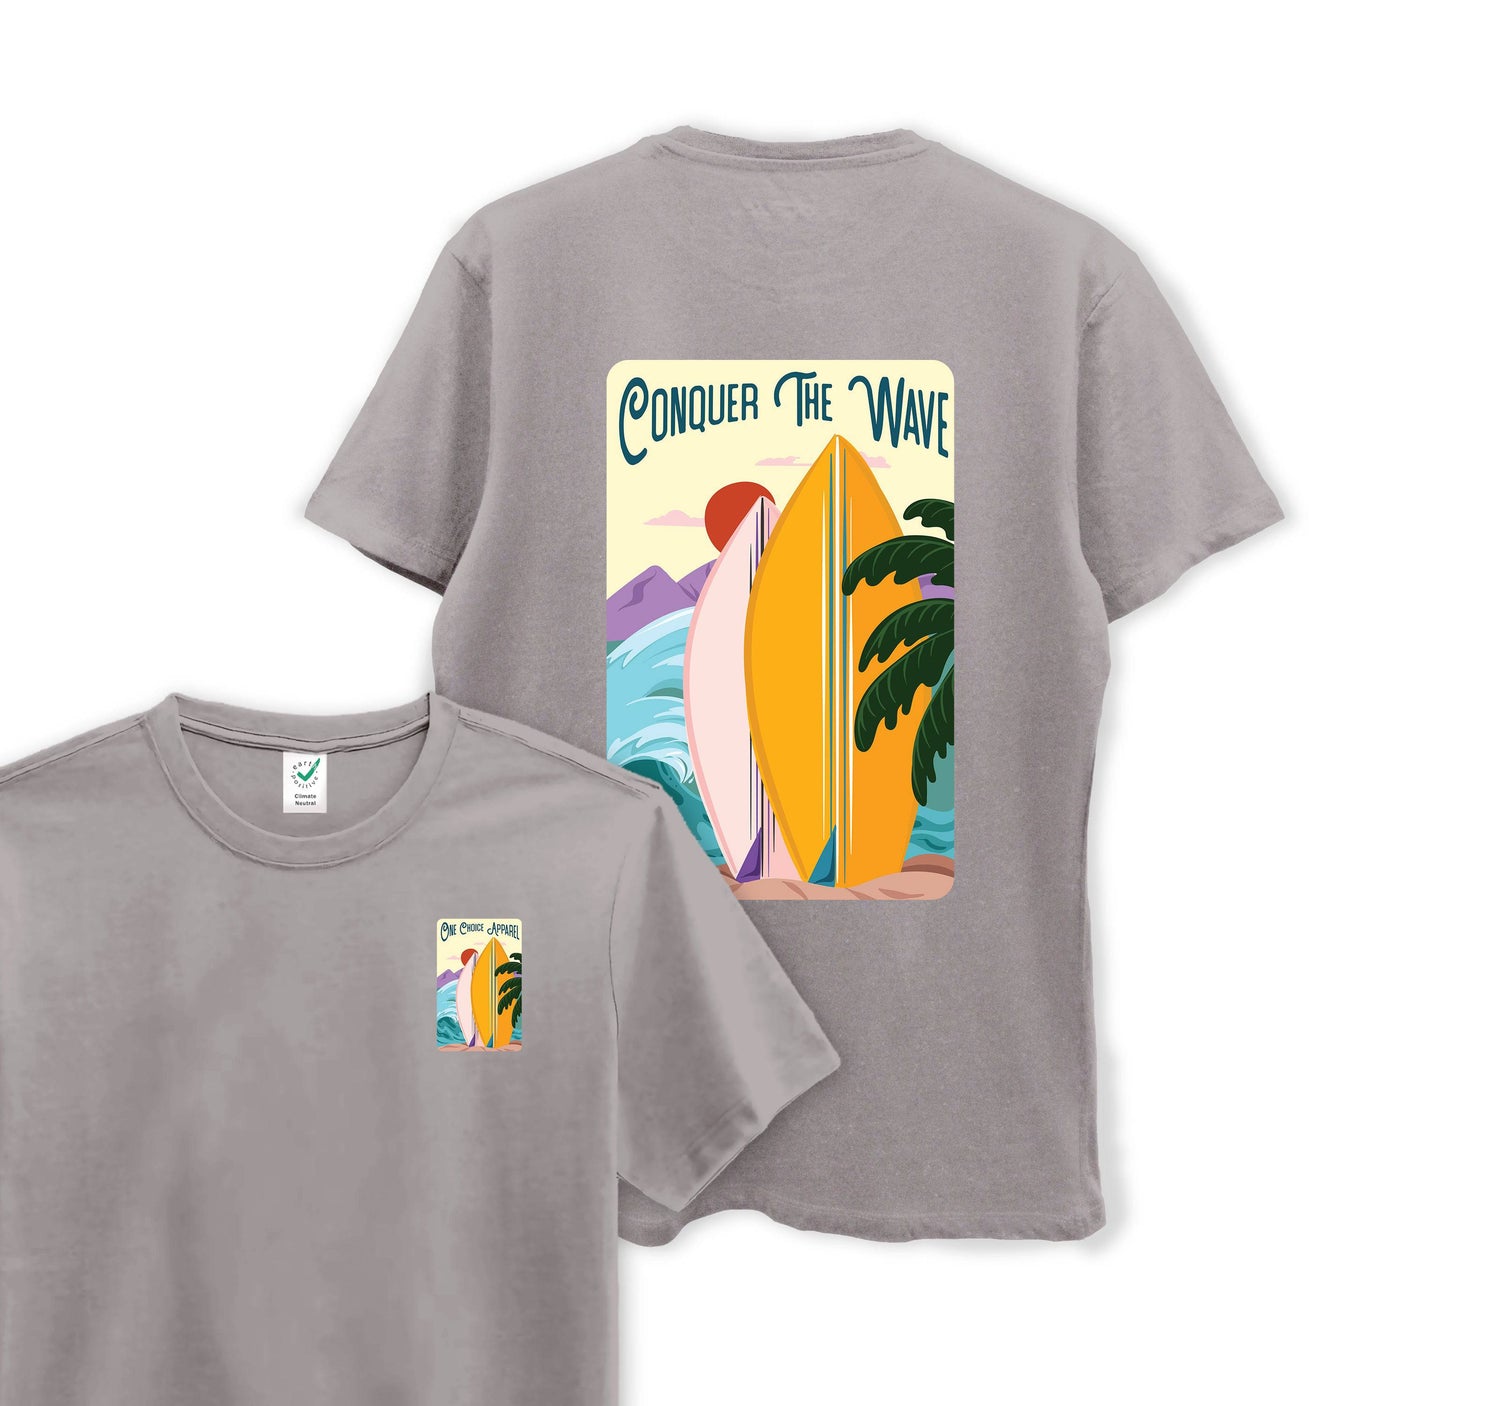 Conquer The Wave - Organic Cotton Tee - One Choice Apparel